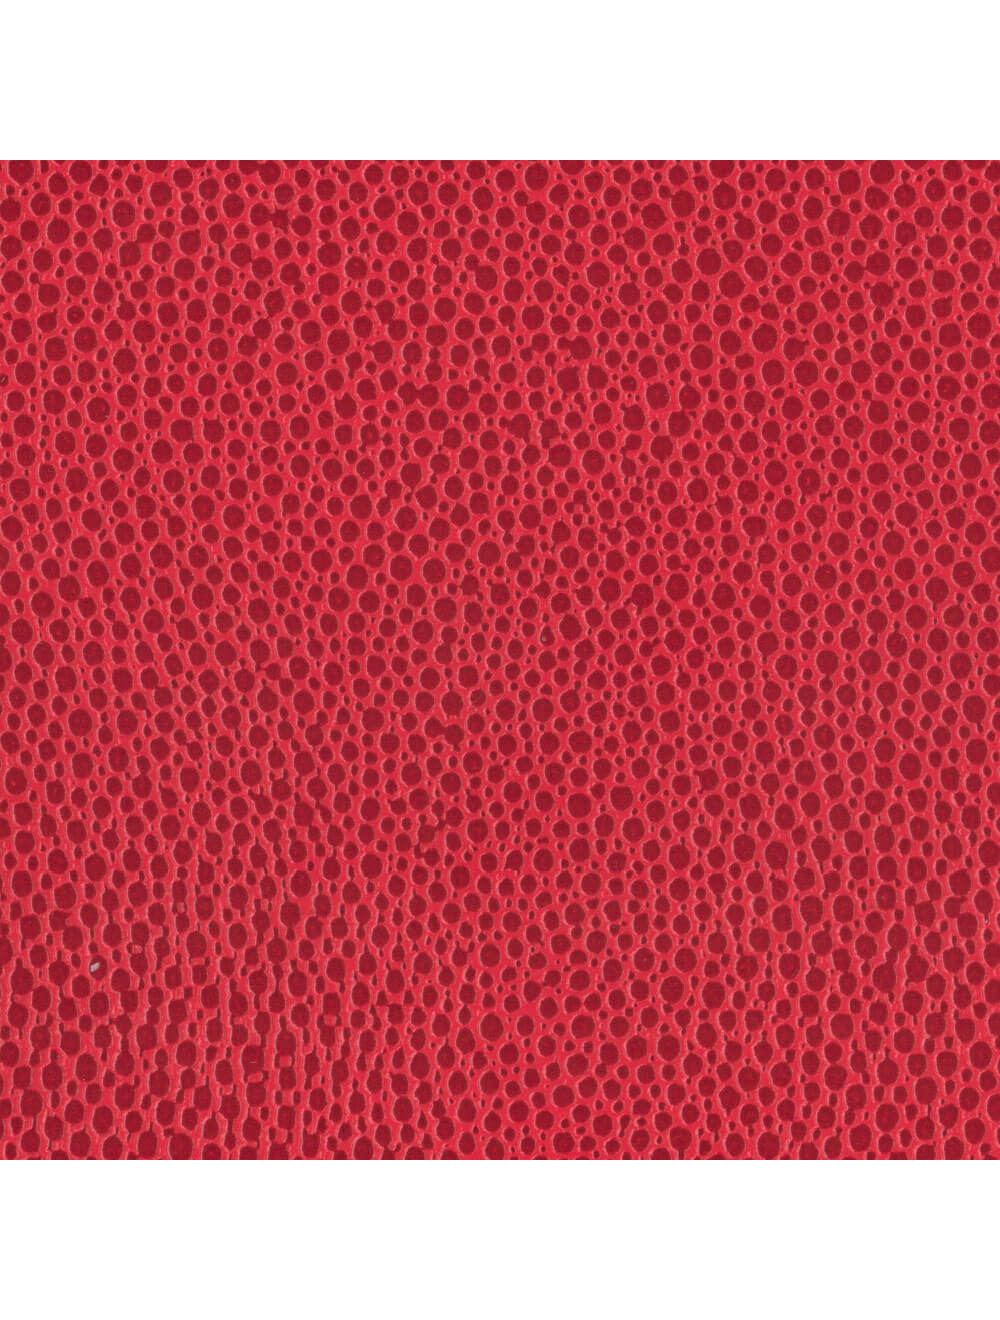 Berlin Mallory Red Material Swatch (PEM9226)